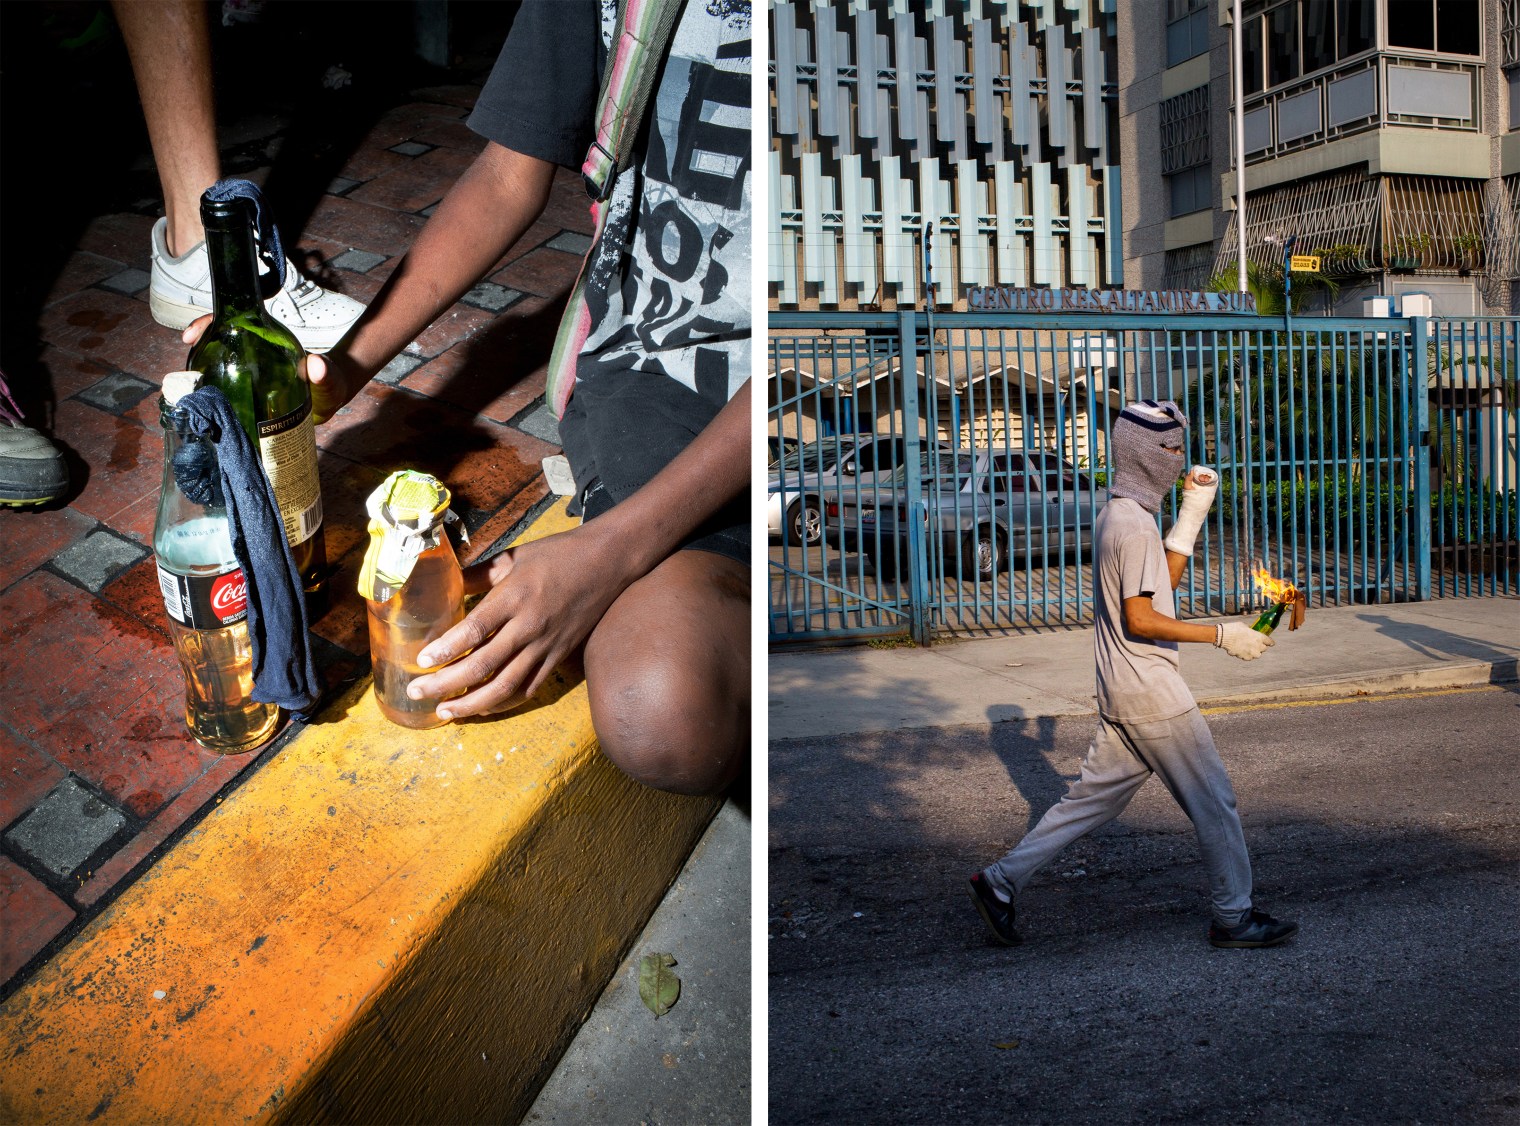 Left: A boy prepares Molotov cocktails during a quiet afternoon in the Chacao section of Caracas on July 31. Right: A youth holds a Molotov cocktail in eastern Caracas.